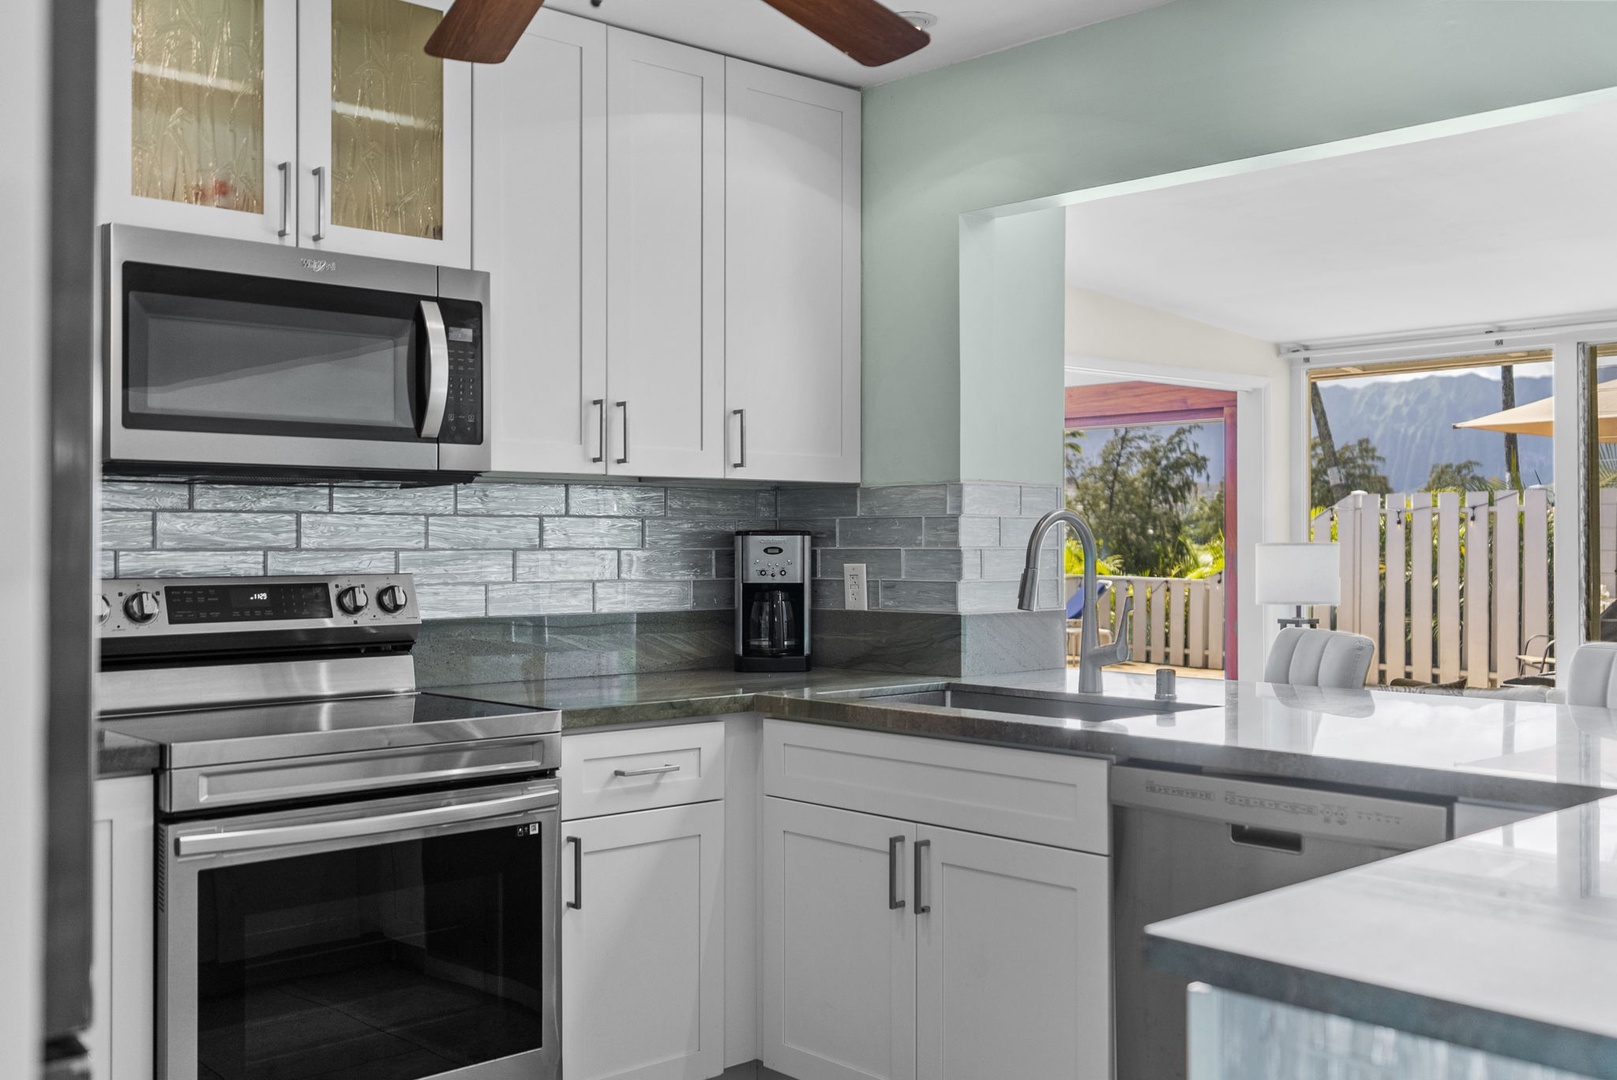 Kailua Vacation Rentals, Hale Aloha - Whip up gourmet meals in this fully-stocked kitchen featuring pristine white cabinetry.